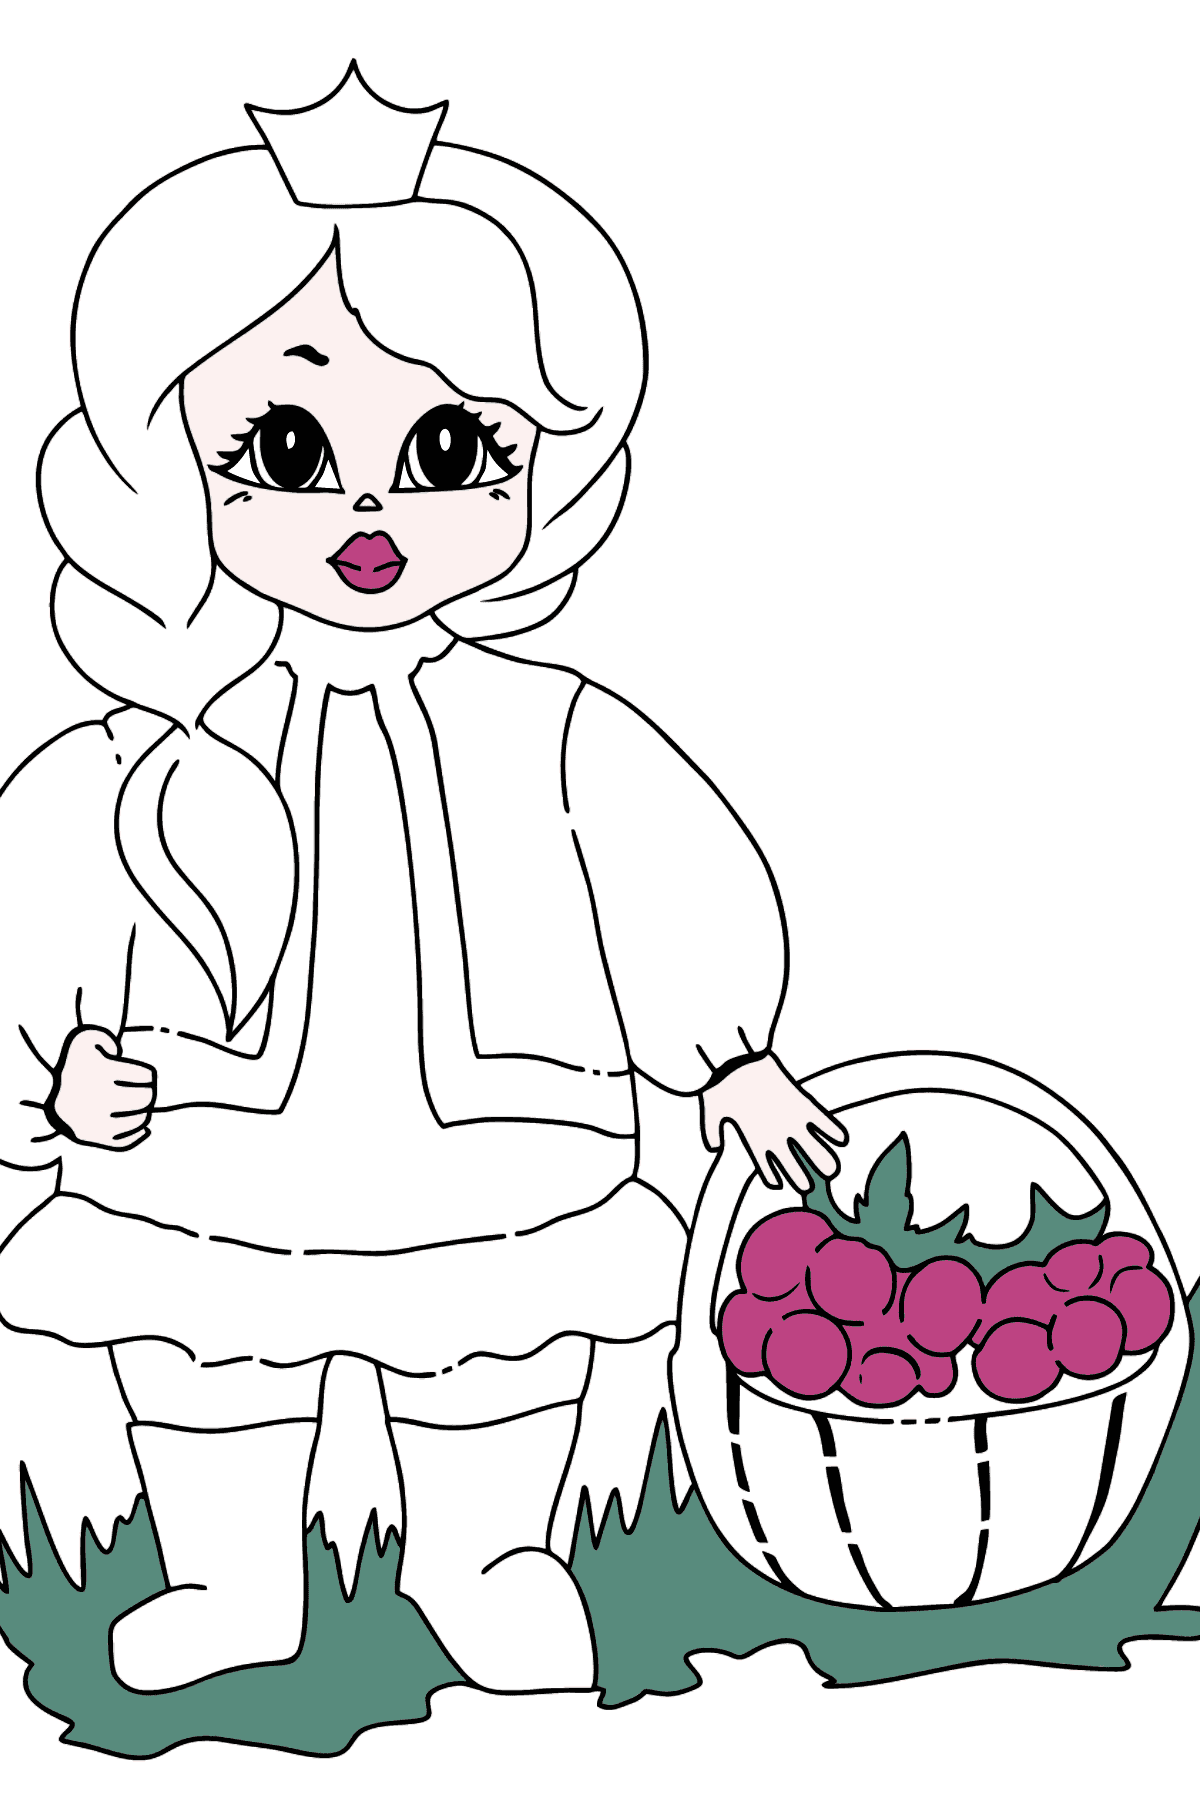 Cute princess coloring page (simple) - Coloring Pages for Kids